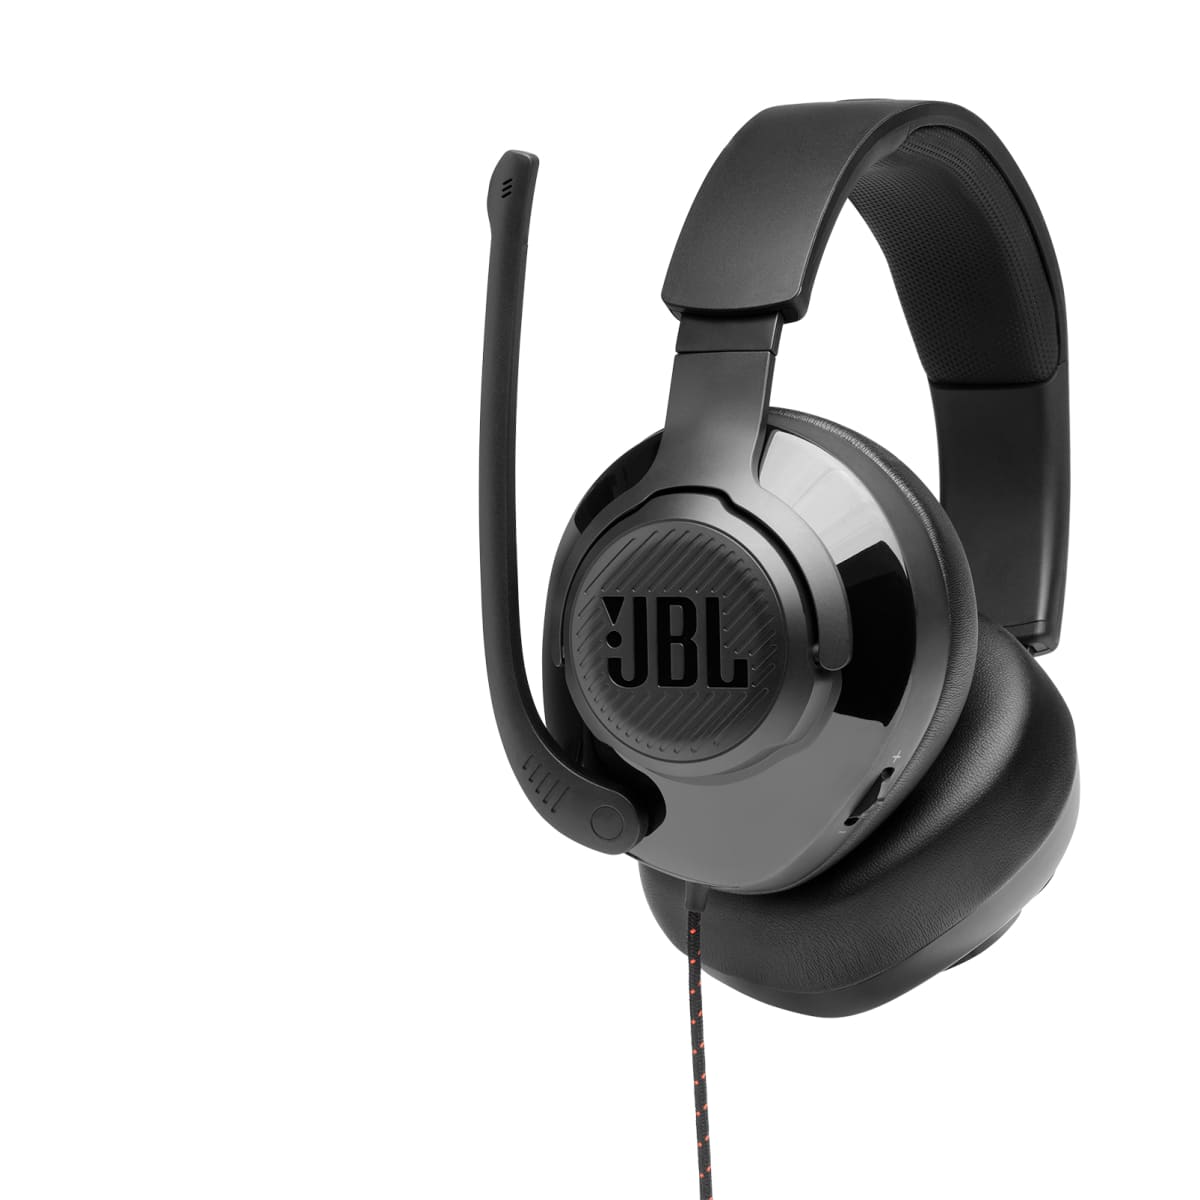 JBL Quantum 300 Hybrid wired over-ear gaming headset with 